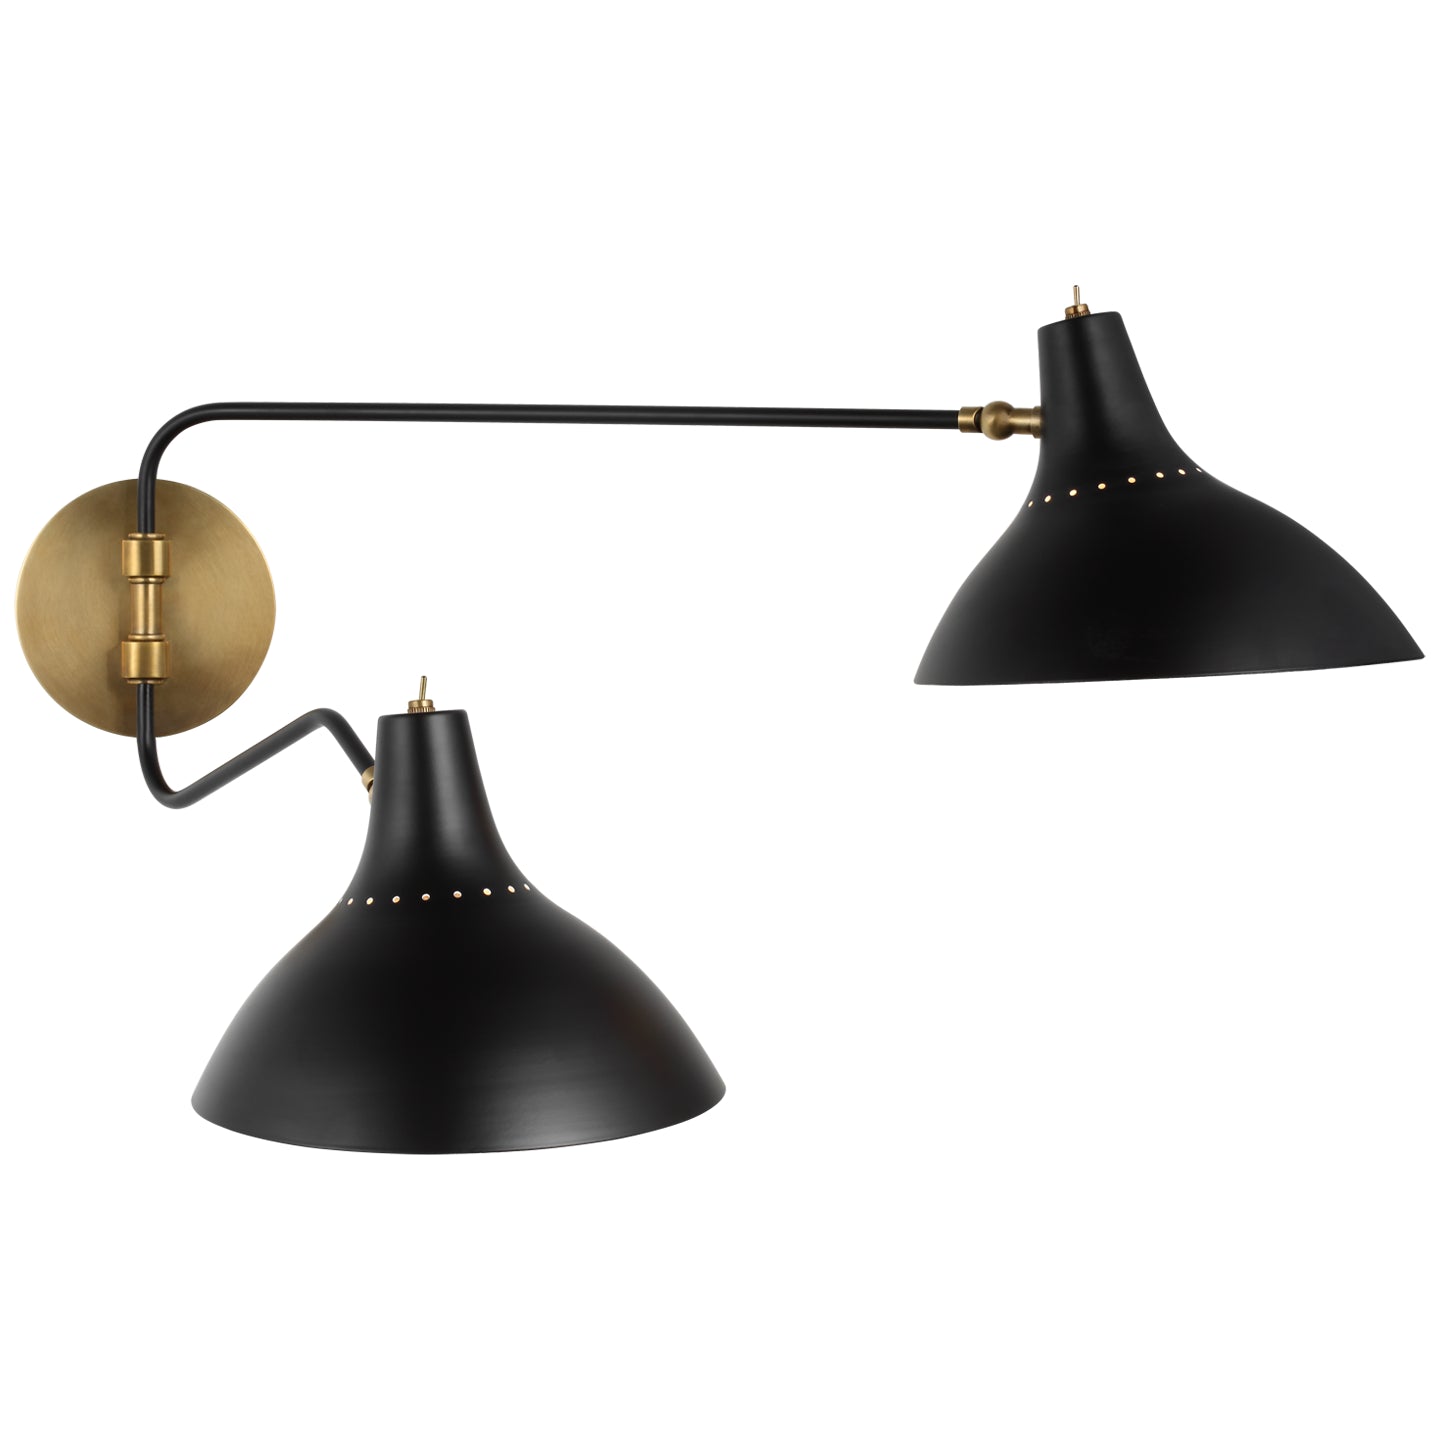 Load image into Gallery viewer, Visual Comfort Signature - ARN 2071BLK - Two Light Wall Sconce - Charlton - Black
